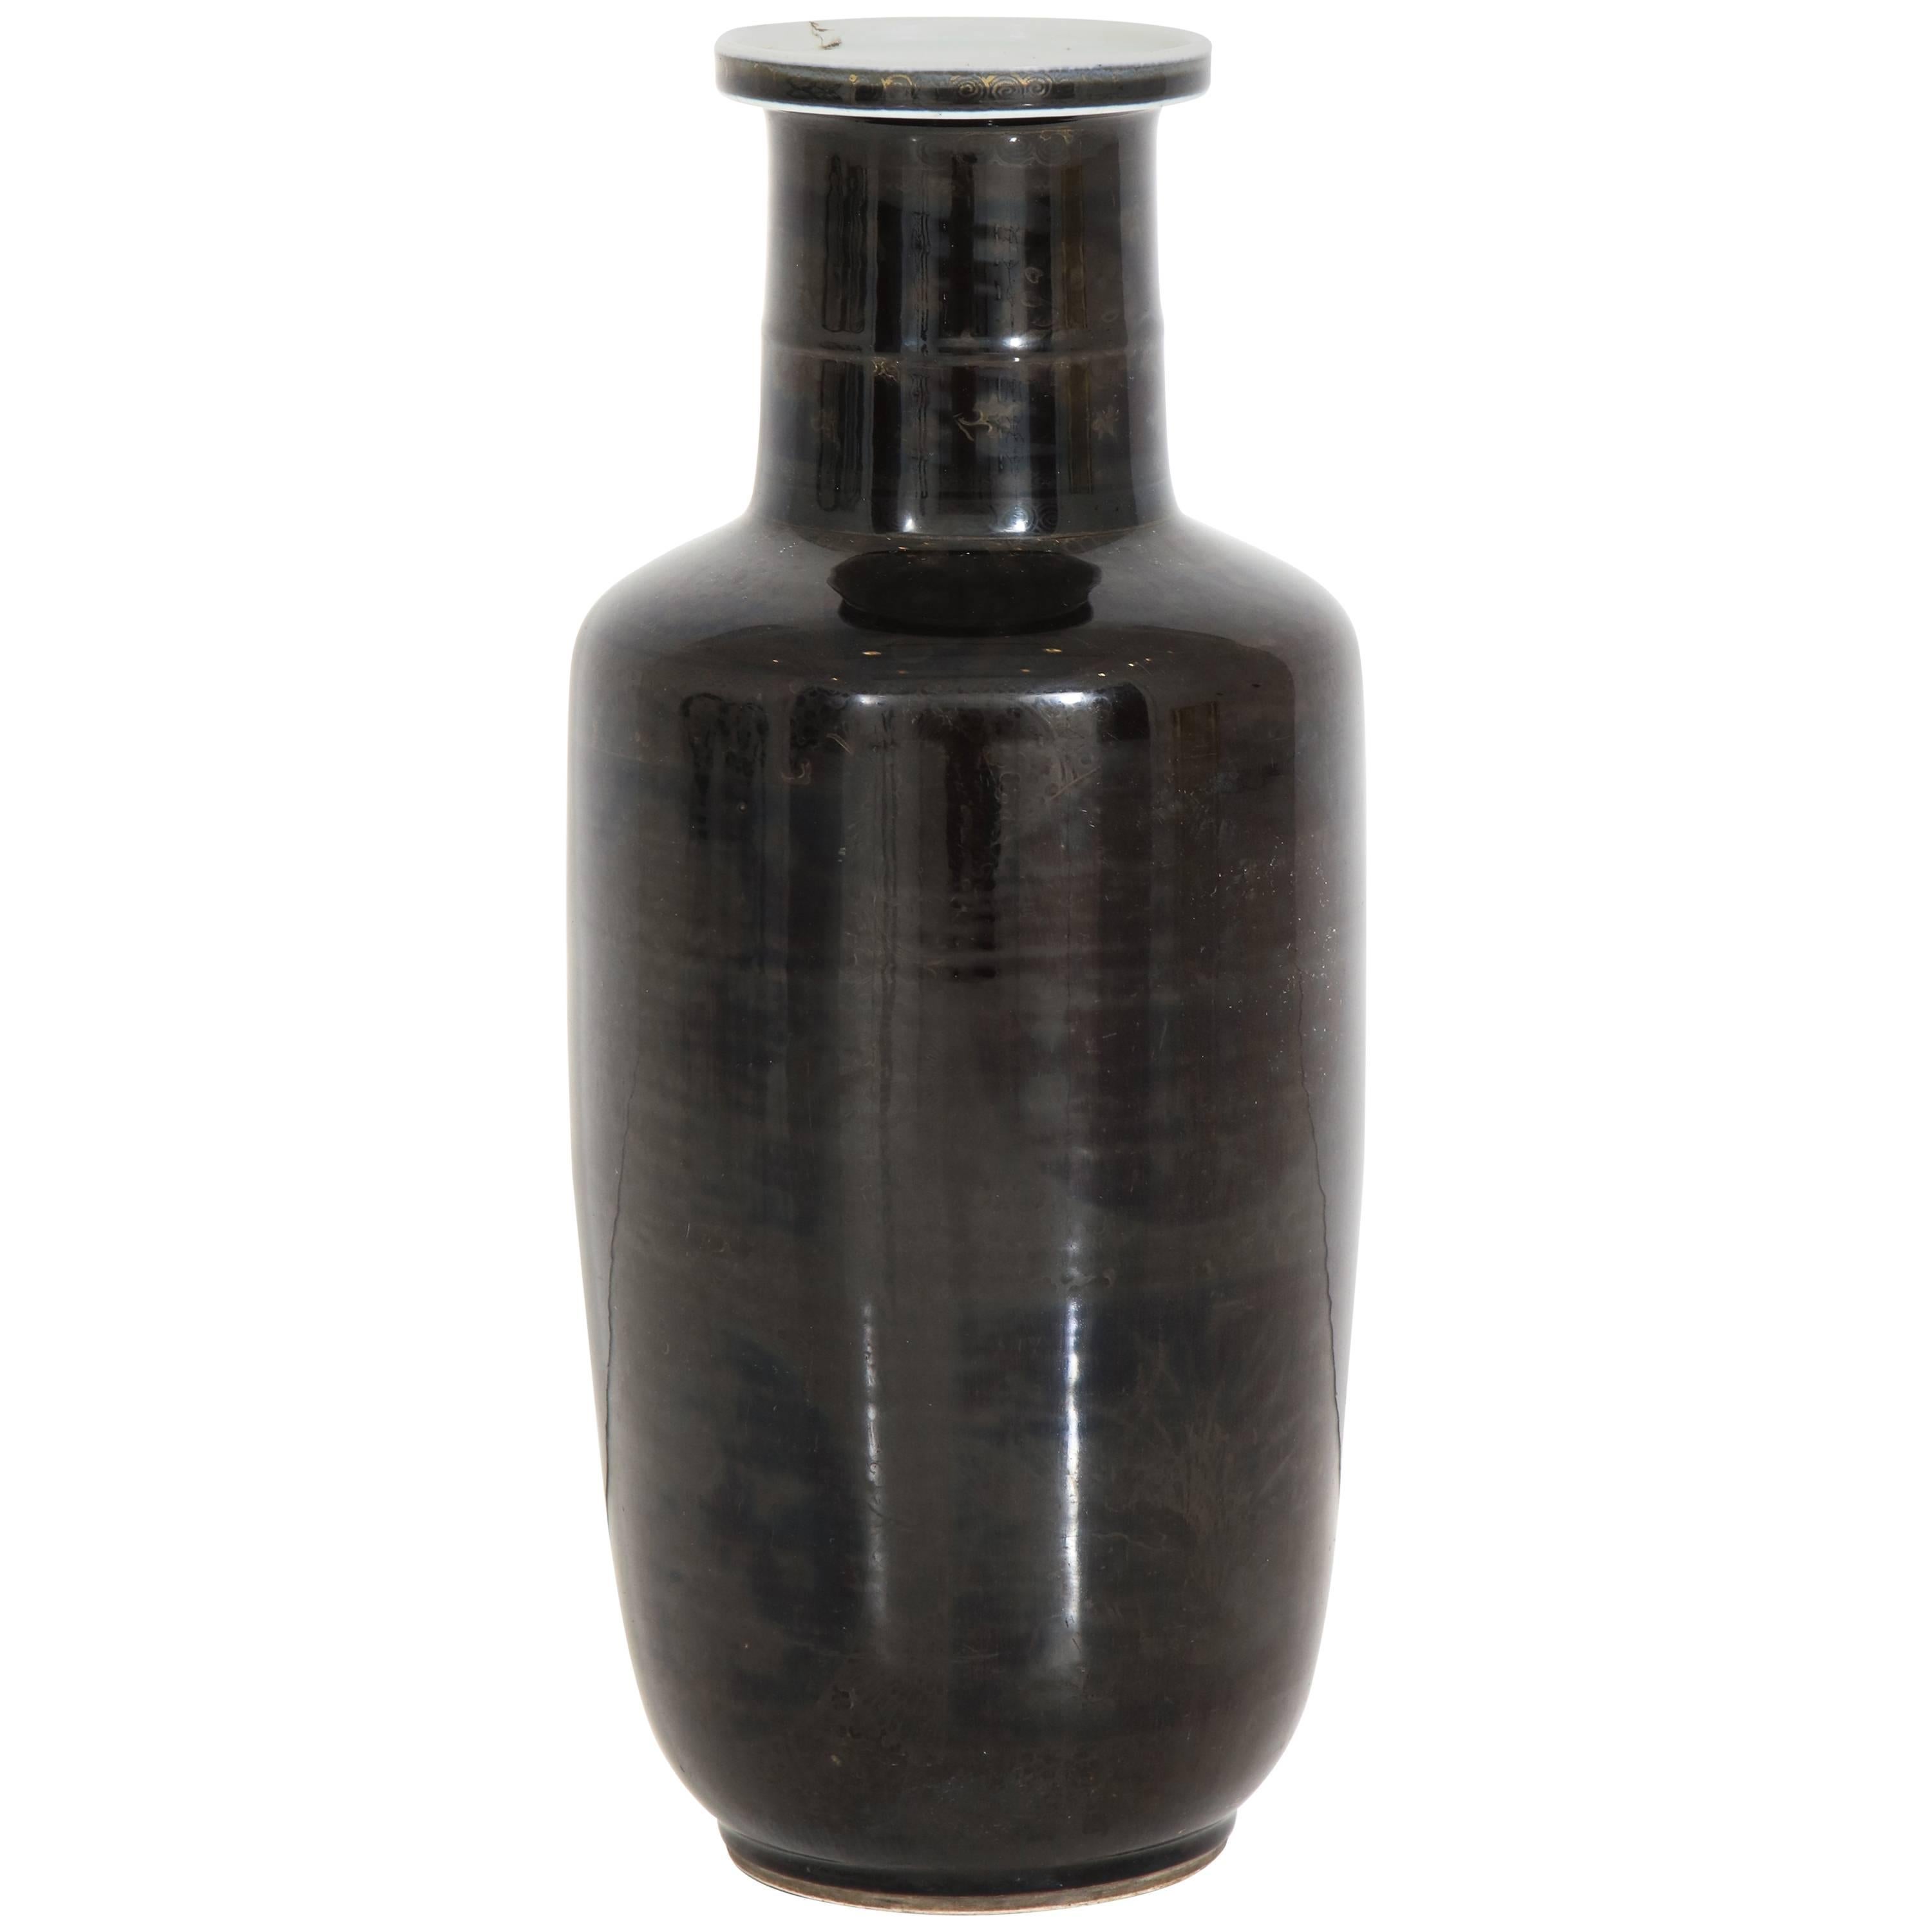 Chinese Kangxi Period Black Vase with Traces of Original Gilt Decoration